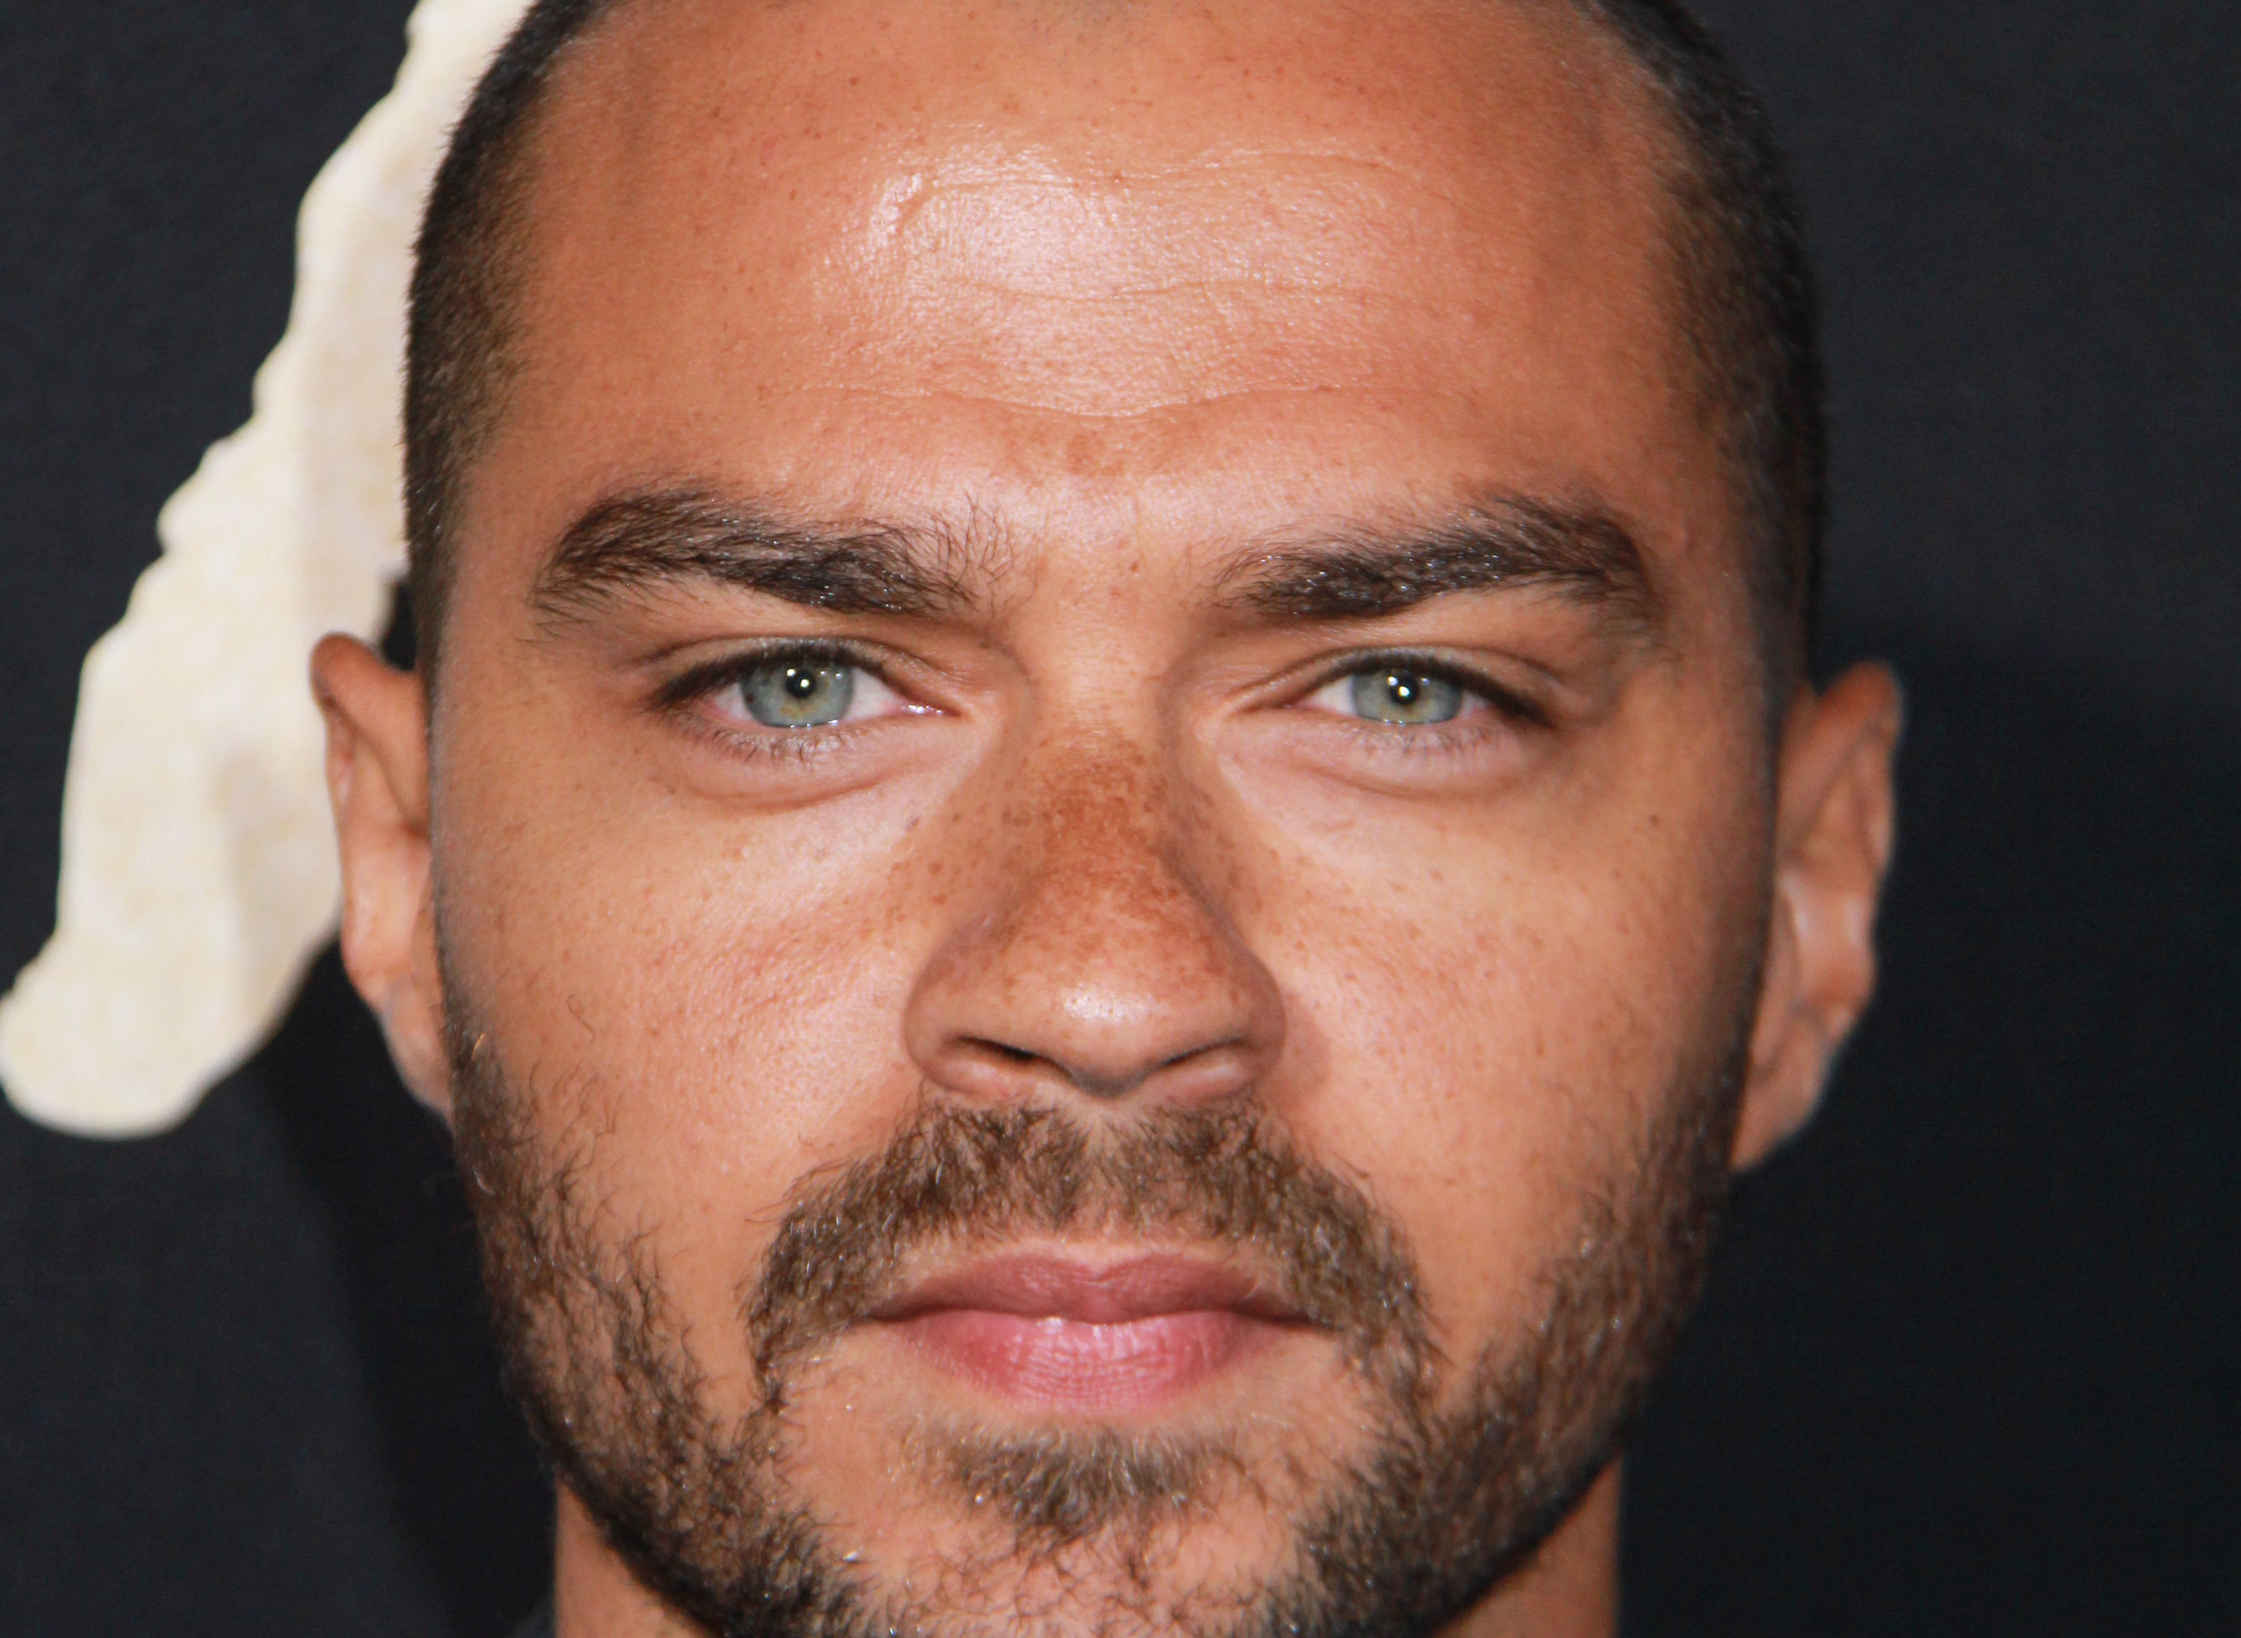 09/21/2016 - Jesse Williams - "The Birth of a Nation" Los Angeles Premiere - Inside Arrivals - ArcLight Cinemas Cinerama Dome, 6360 Sunset Boulevard - Los Angeles, CA, USA - Keywords: Vertical, Fox Searchlight Pictures, Biography, Drama, Film Premiere, Movie Premiere, Person, People, Celebrity, Celebrities, Portrait, Photography, Red Carpet Event, Arts Culture and Entertainment, Attending, Hollywood, California Orientation: Portrait Face Count: 1 - False - Photo Credit: Izumi Hasegawa / PRPhotos.com - Contact (1-866-551-7827) - Portrait Face Count: 1